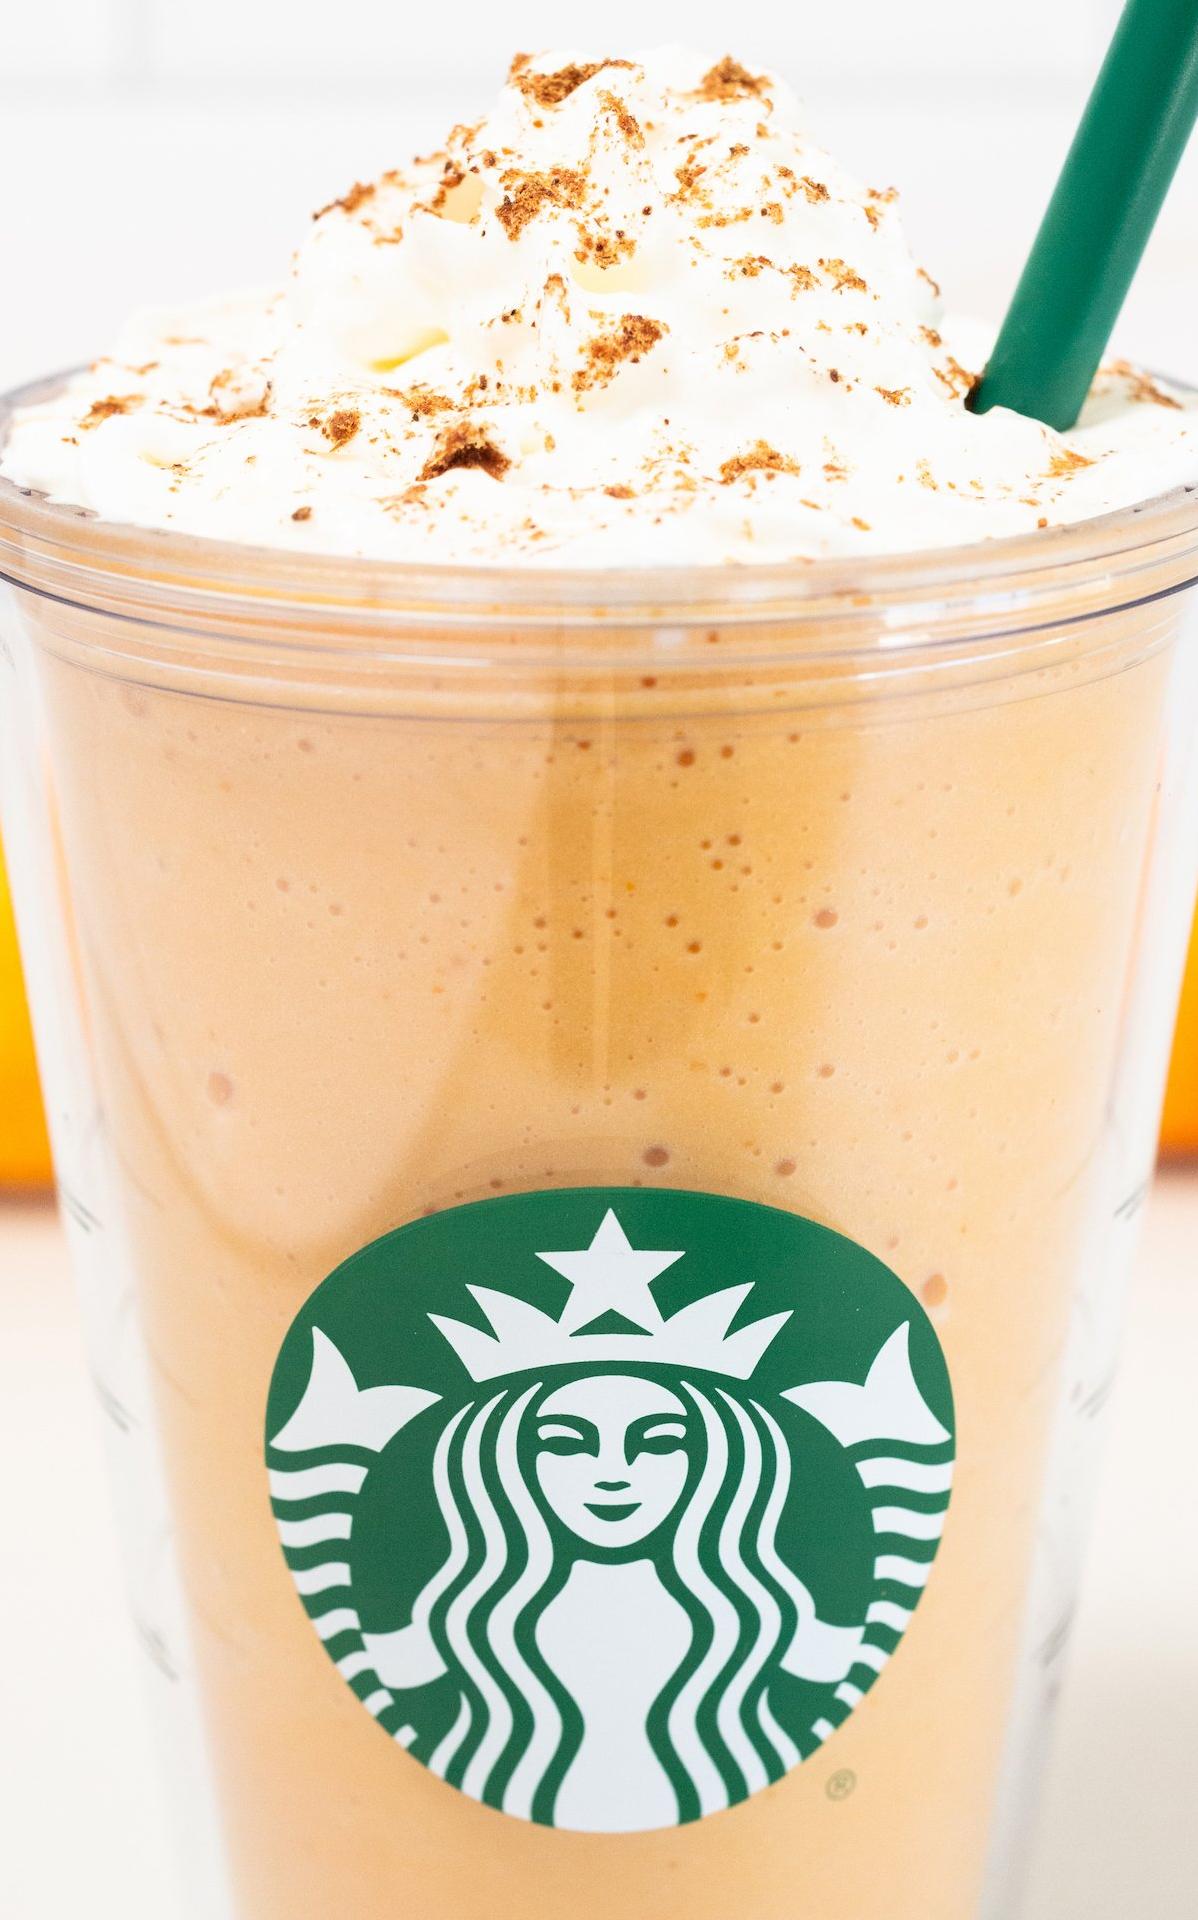  This coffee frappe is a winter-spiced treat to warm you up on a chilly day.